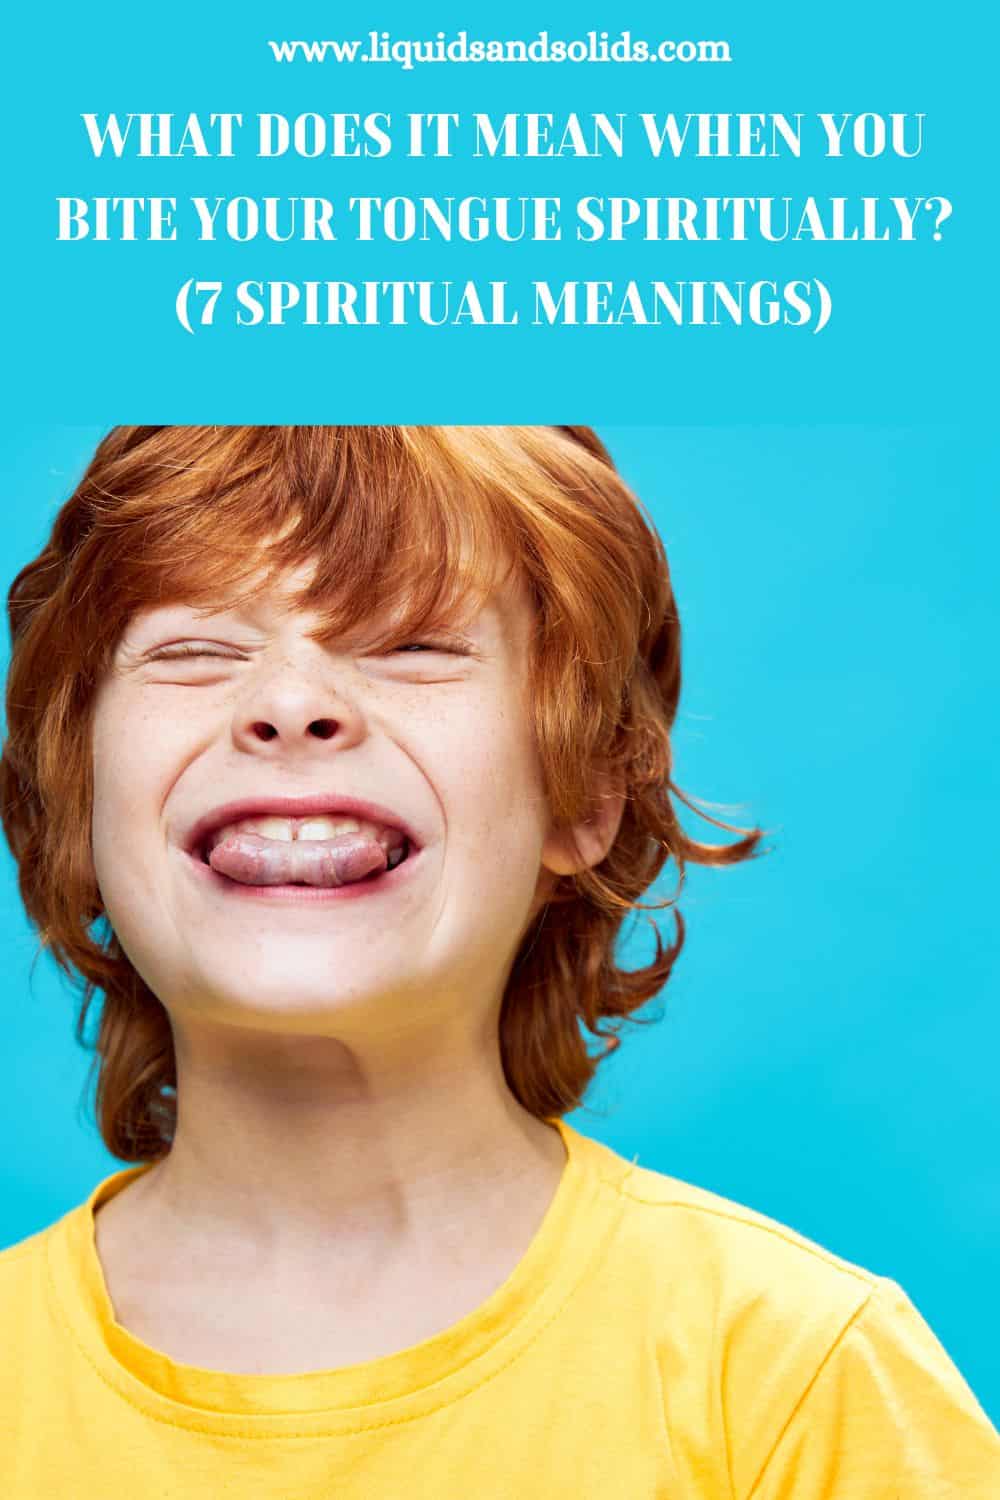 What Does It Mean When You Bite Your Tongue Spiritually? (7 Spiritual Meanings)